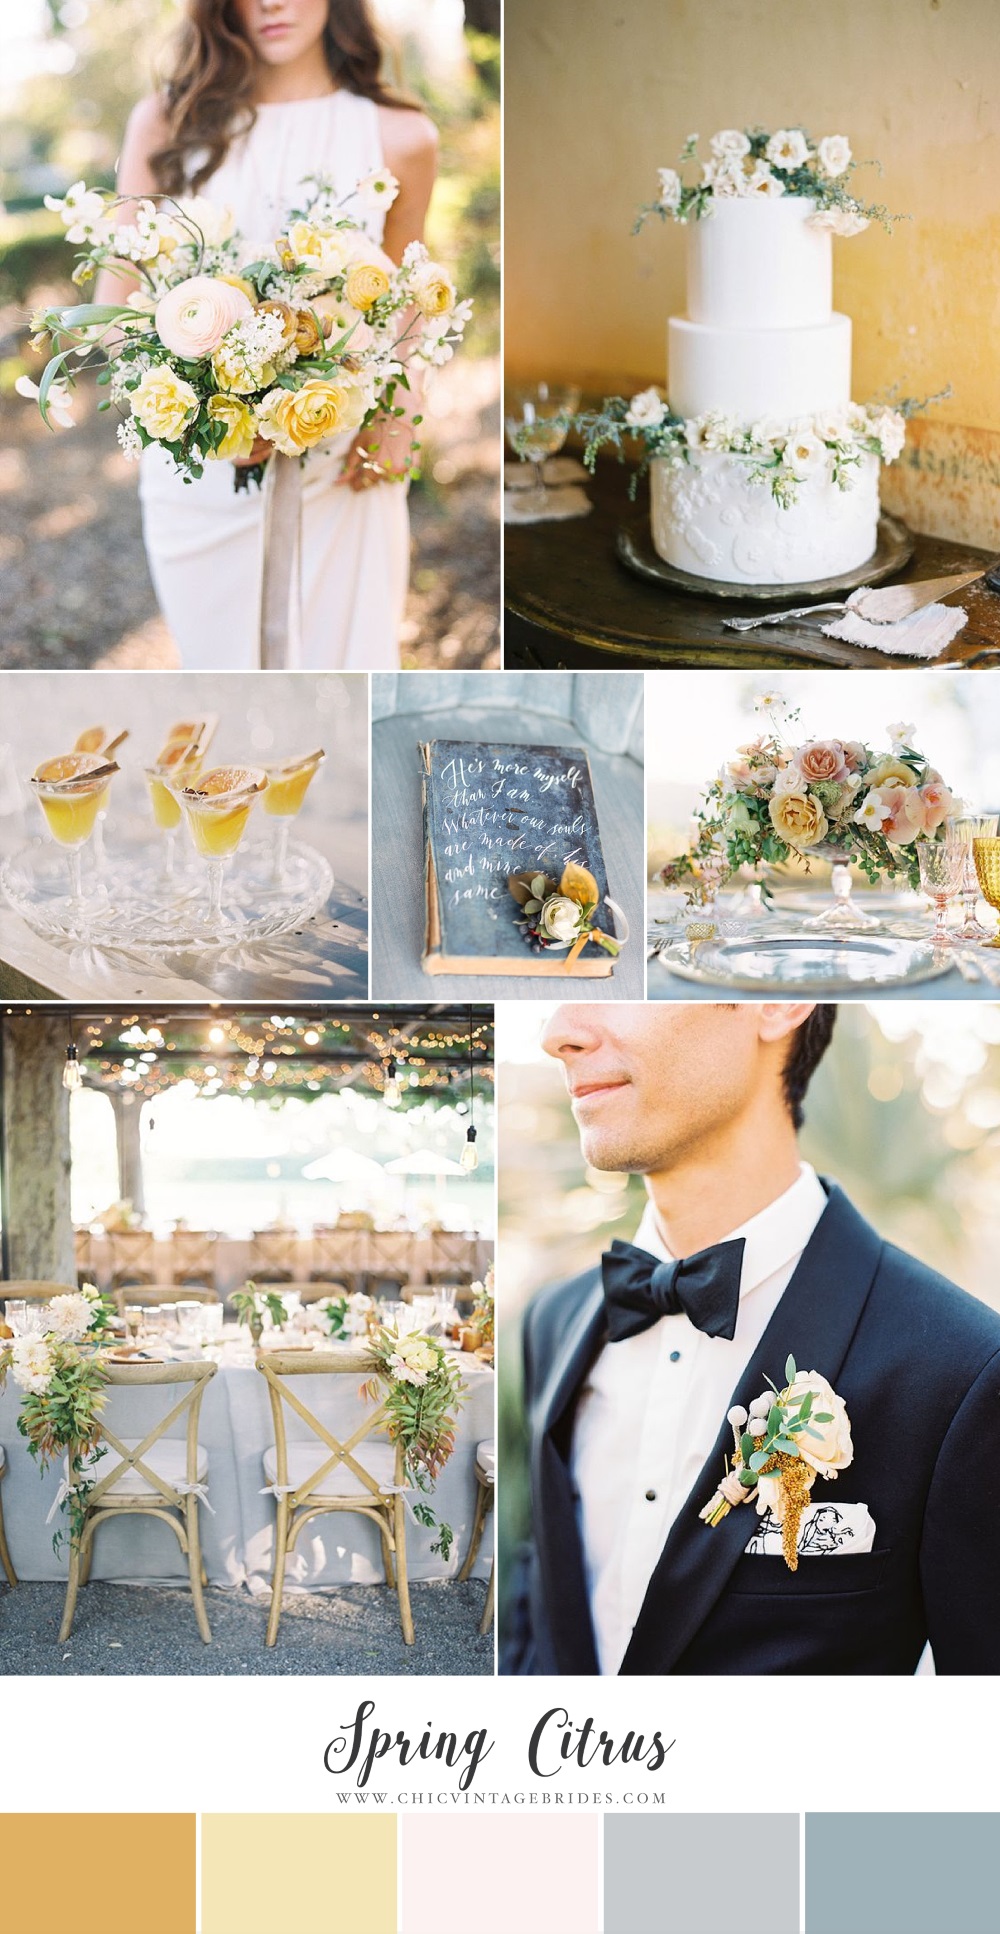 Spring Citrus - Chic Wedding Inspiration in Yellow & Slate Blue